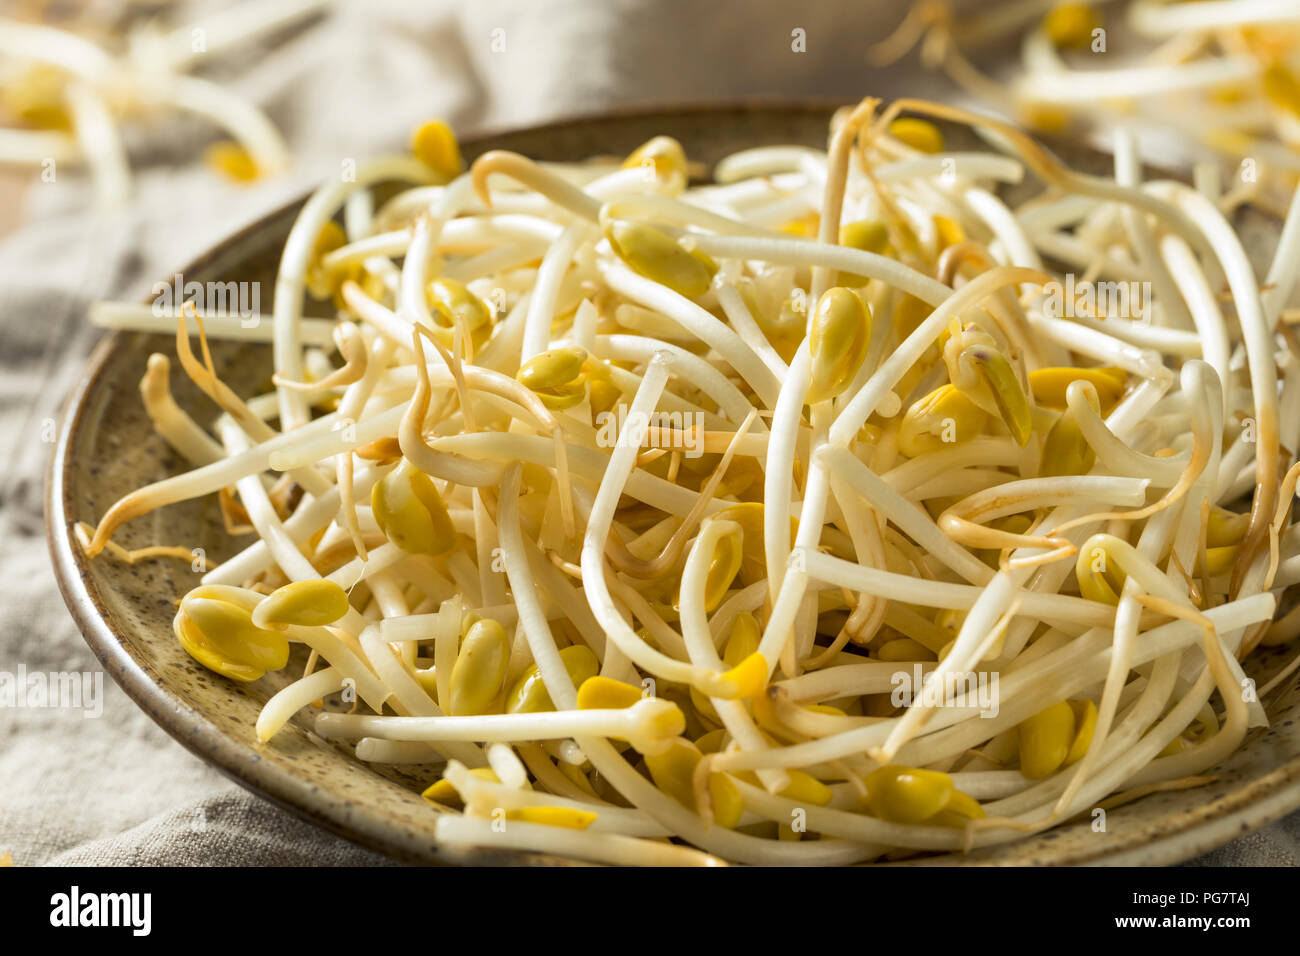 Raw Organic Soy Bean Sprouts in a Bowl Stock Photo